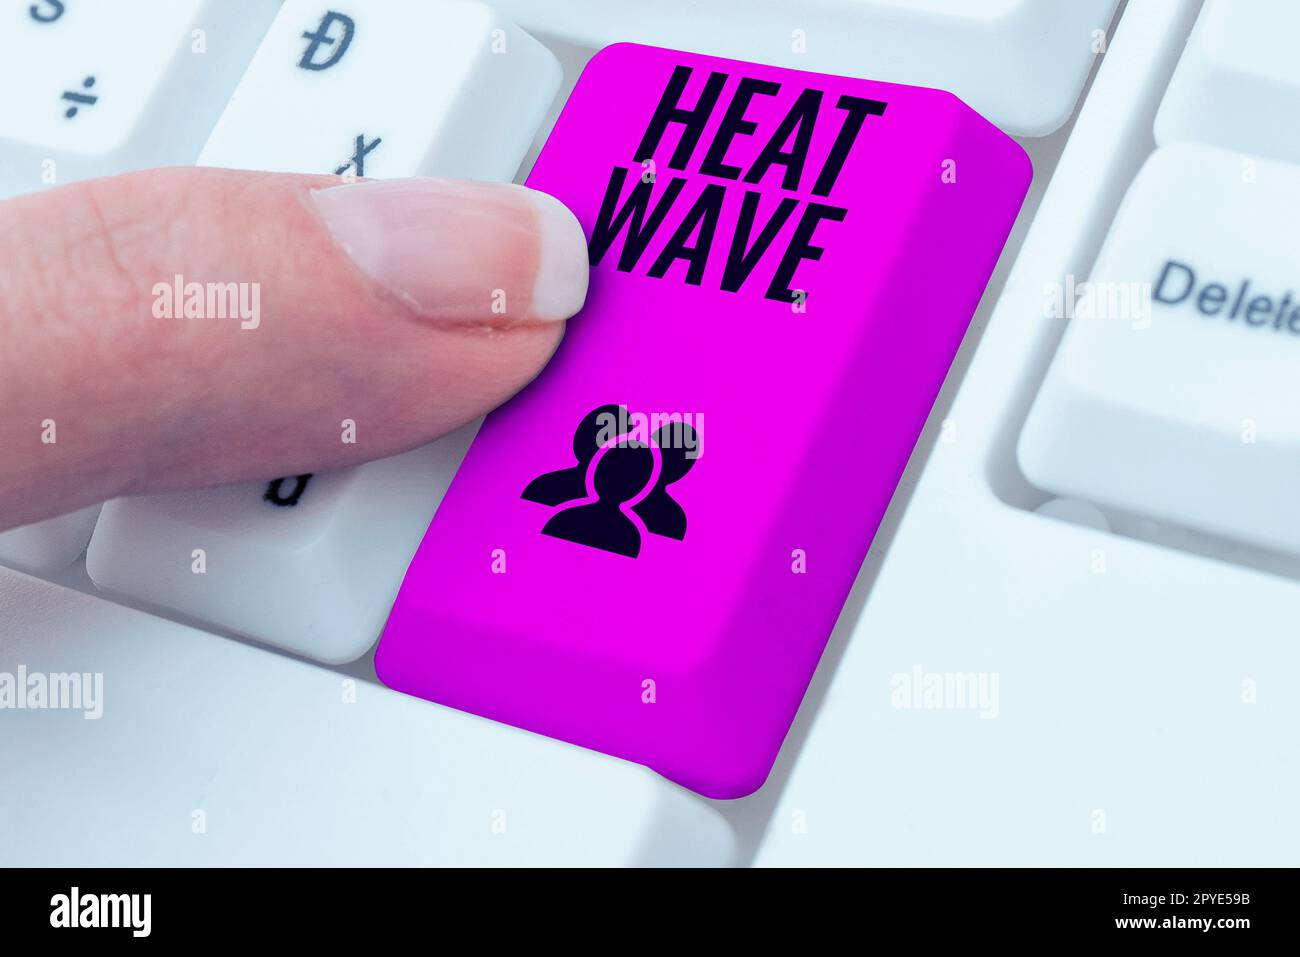 Handwriting text Heat Wave. Business showcase a prolonged period of abnormally hot weather Stock Photo